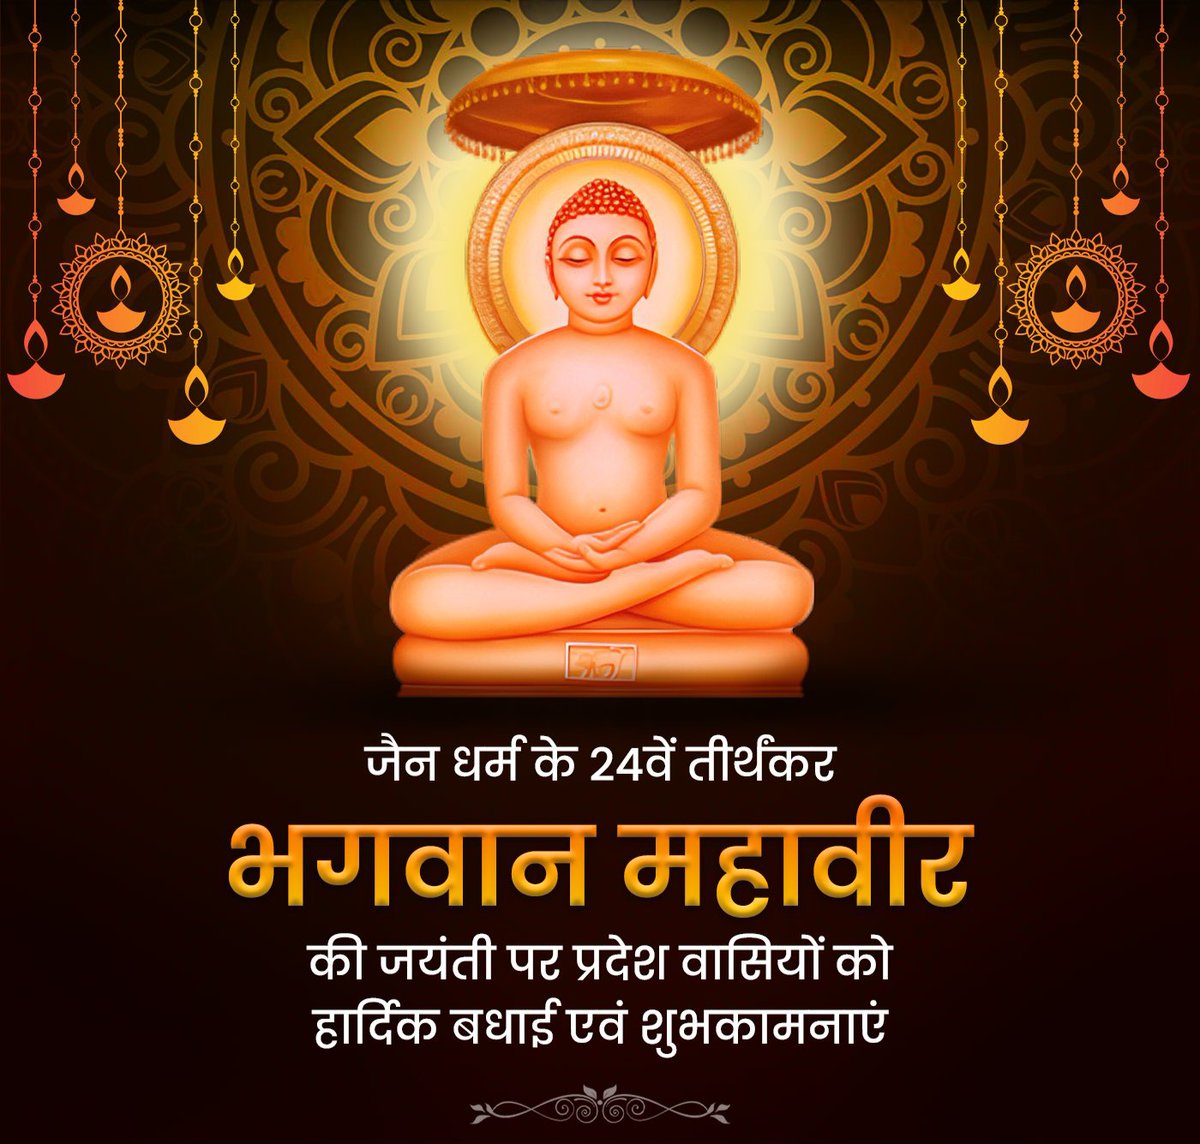 Happy Mahavir jayanti 👍 we indeed embody Lord Mahavir's teachings, embracing non-violence and compassion in our daily lives to create a more peaceful and caring world. Millions of salutations to you 🙏 #MahaveerJayanti #MahavirJayanthi